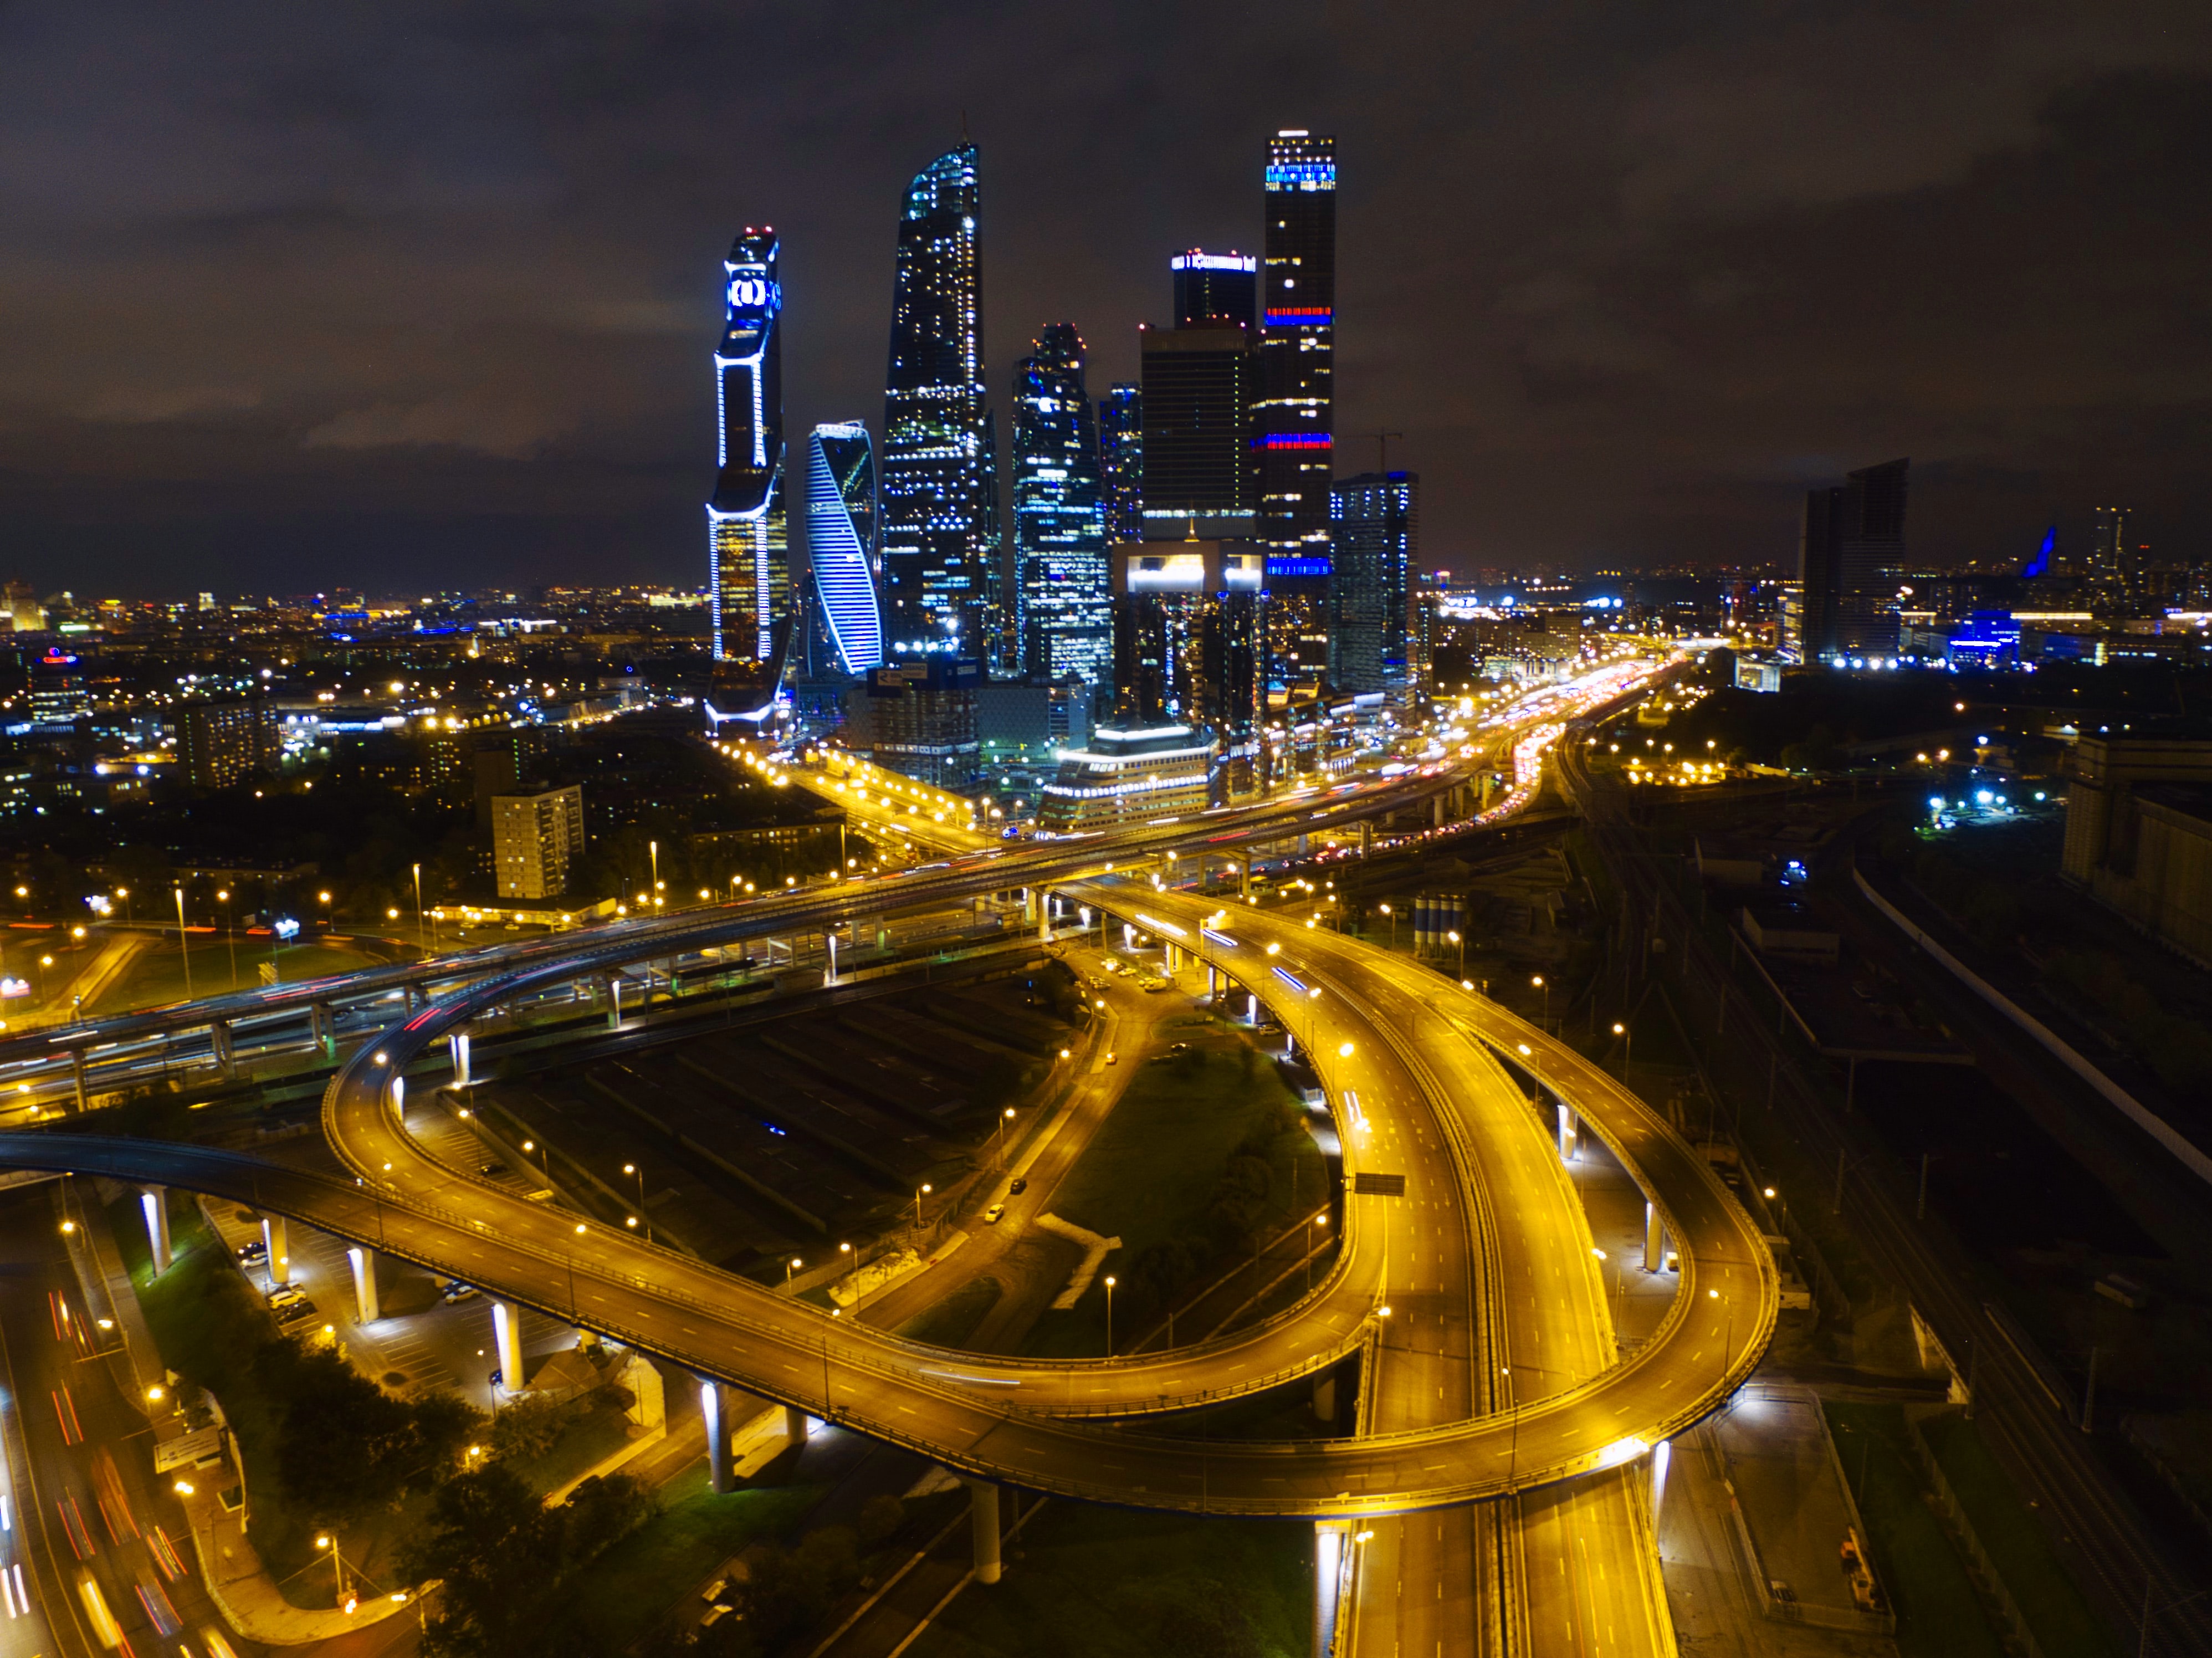 cities, roads, night, moskow, city, building, view from above, russia